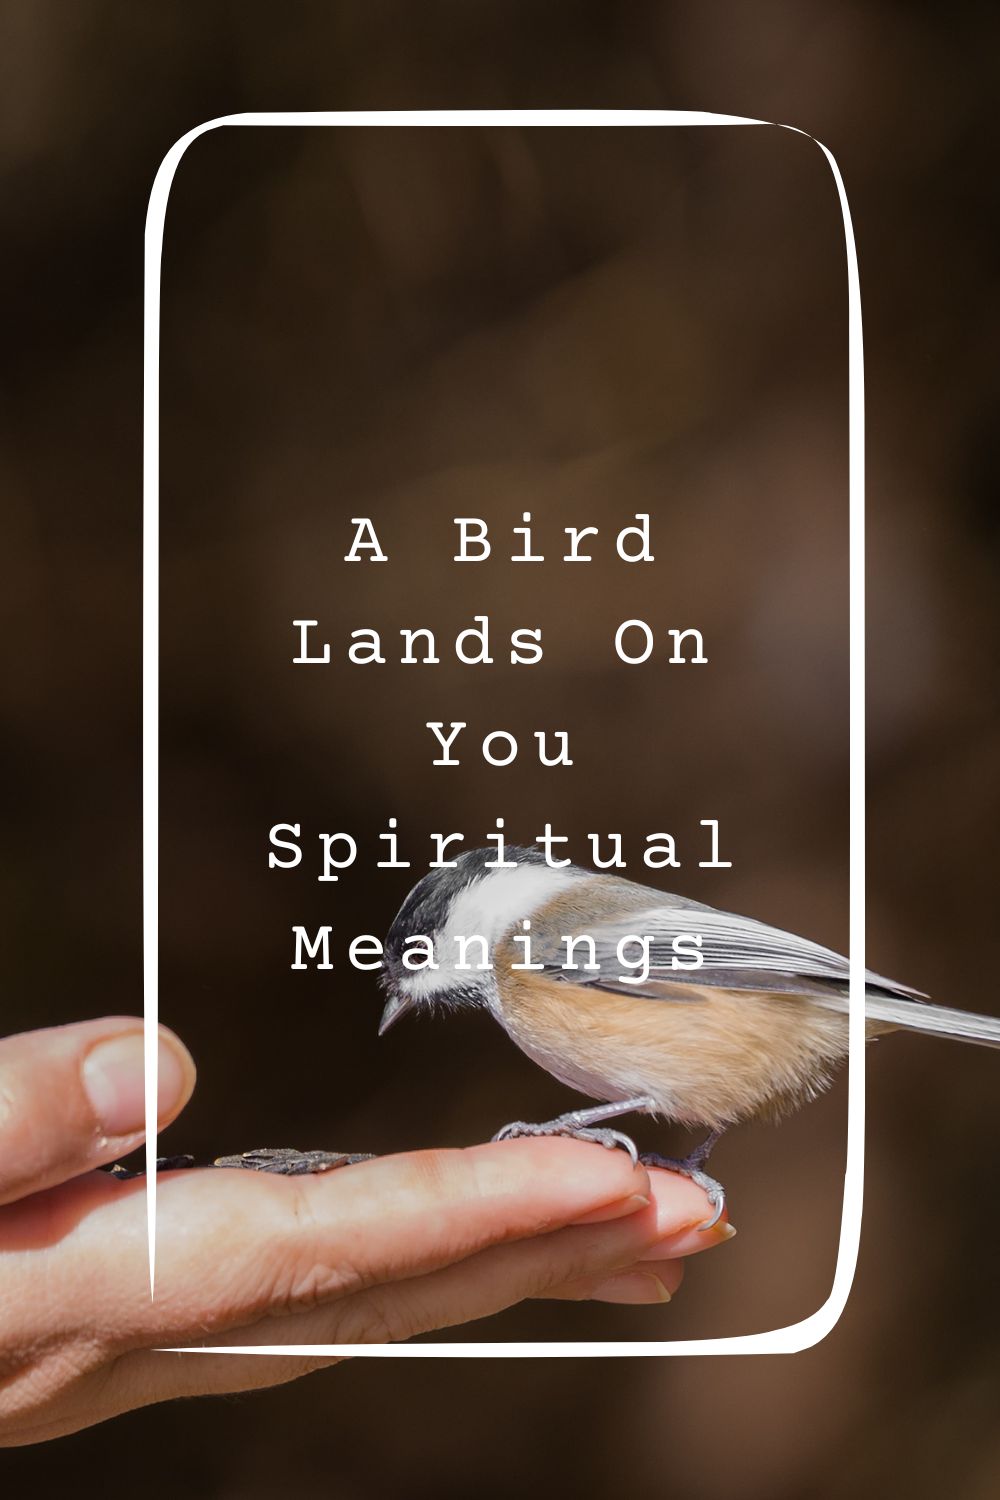 5 A Bird Lands On You Spiritual Meanings1